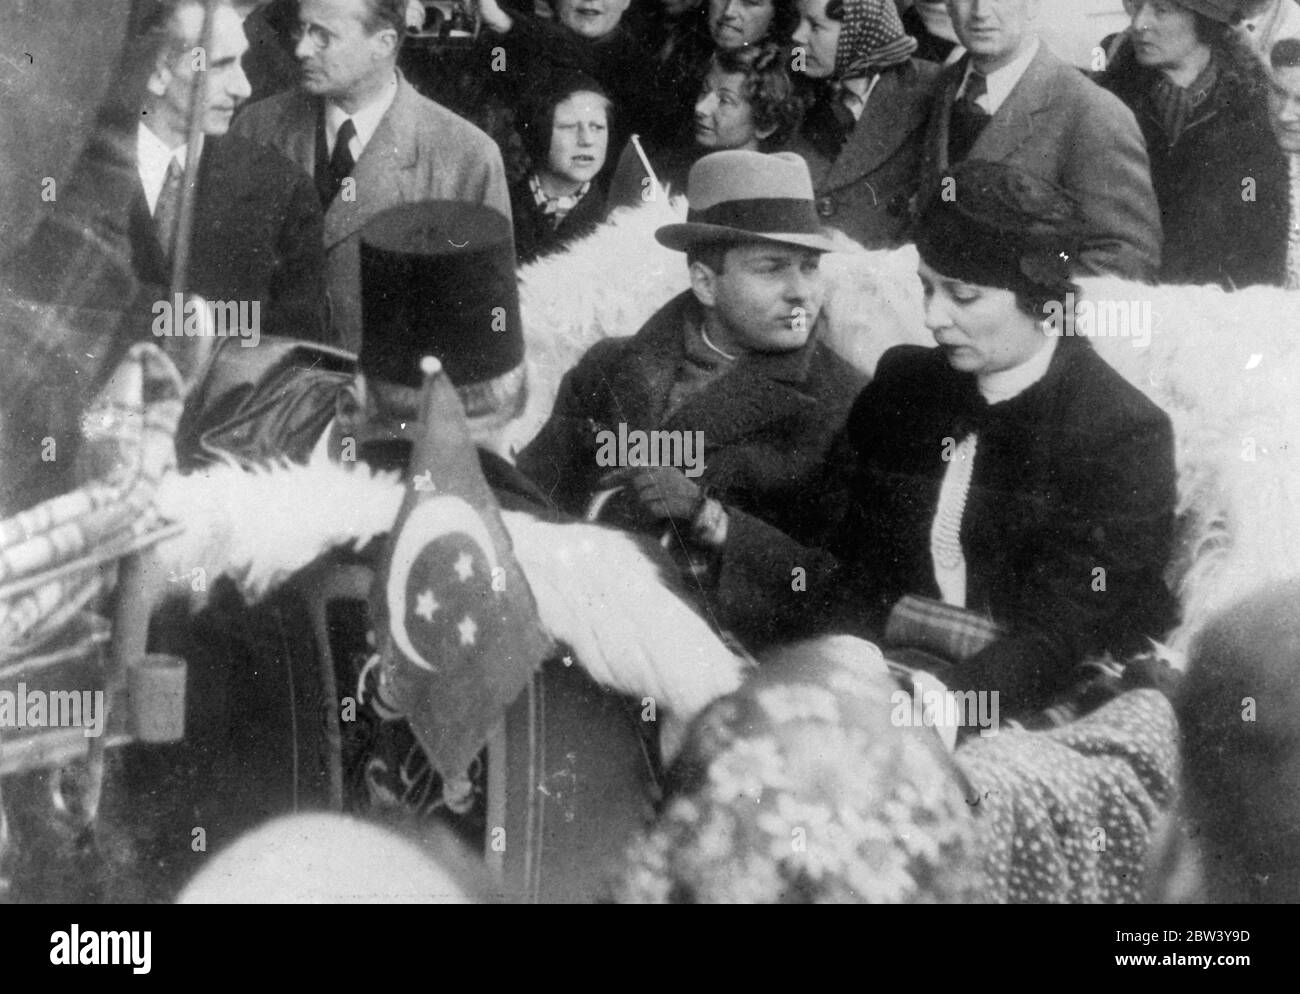 King Farouk on holiday at St Moriz. 16-year-old King Farouk of Egypt, accompanied by his mother Queen Nazli, is spending a winter sports holiday at St Moritz during his European tour. Later he will come to England to study conditions and will stay for the the Coronation. Photo shows: King Farouk and his mother, Queen Nazili, driving through St Moritz. 5 March 1937 Stock Photo